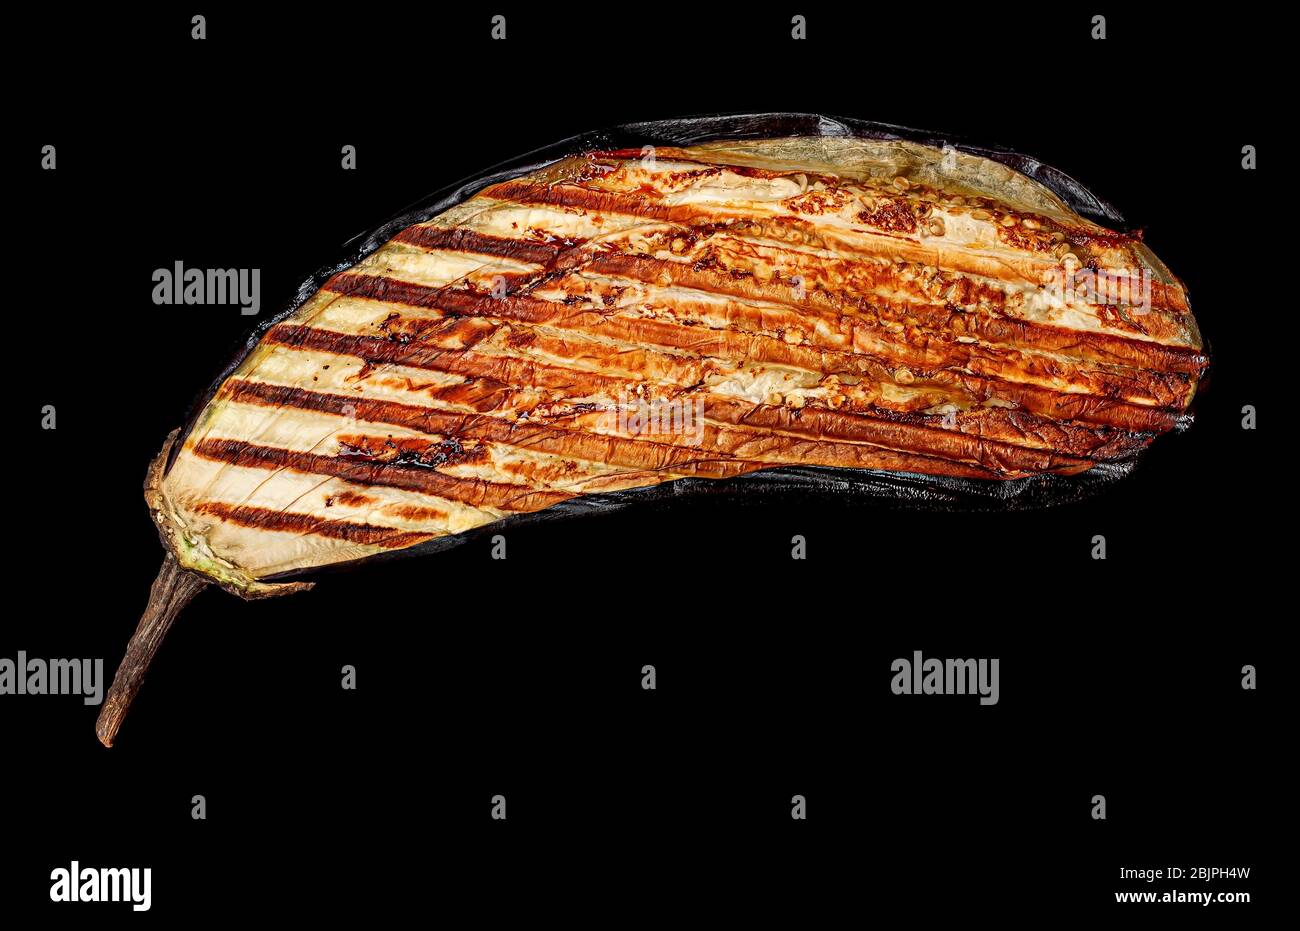 Grilled eggplant in black background Stock Photo